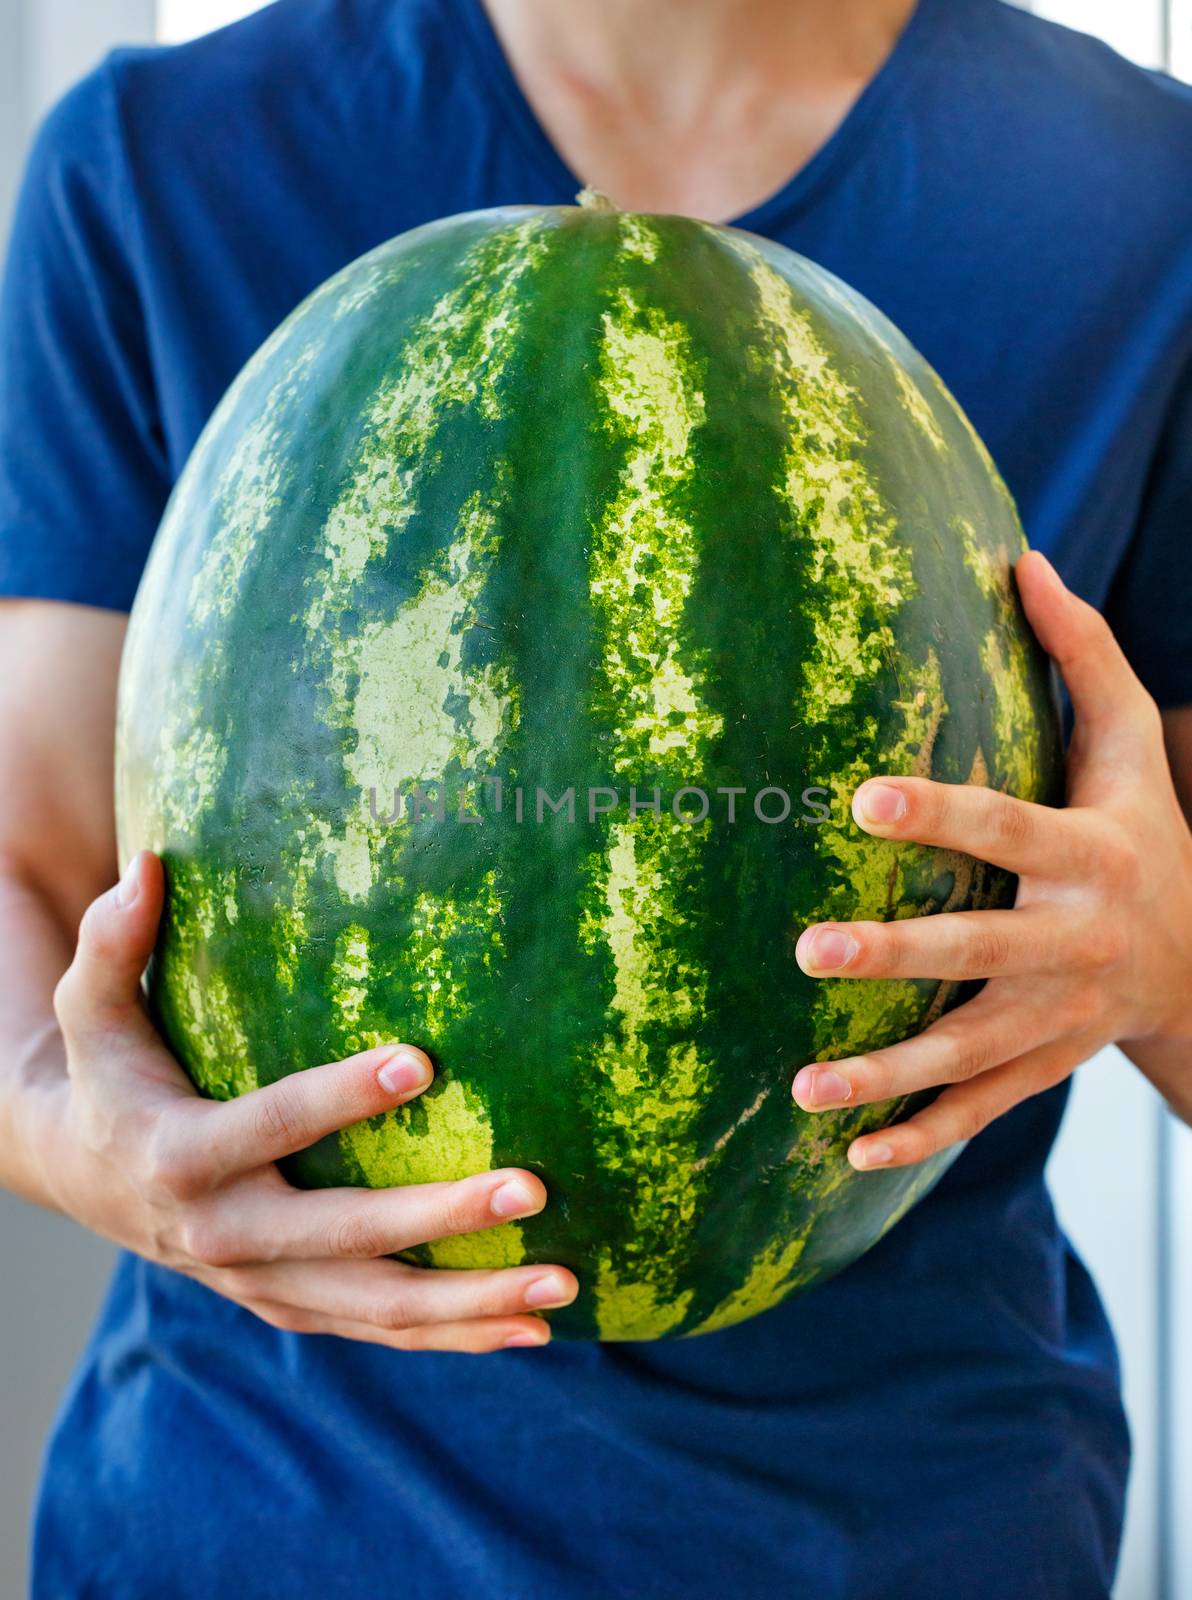 A huge ripe green striped watermelon in the hands of a young man in a blue T-shirt.